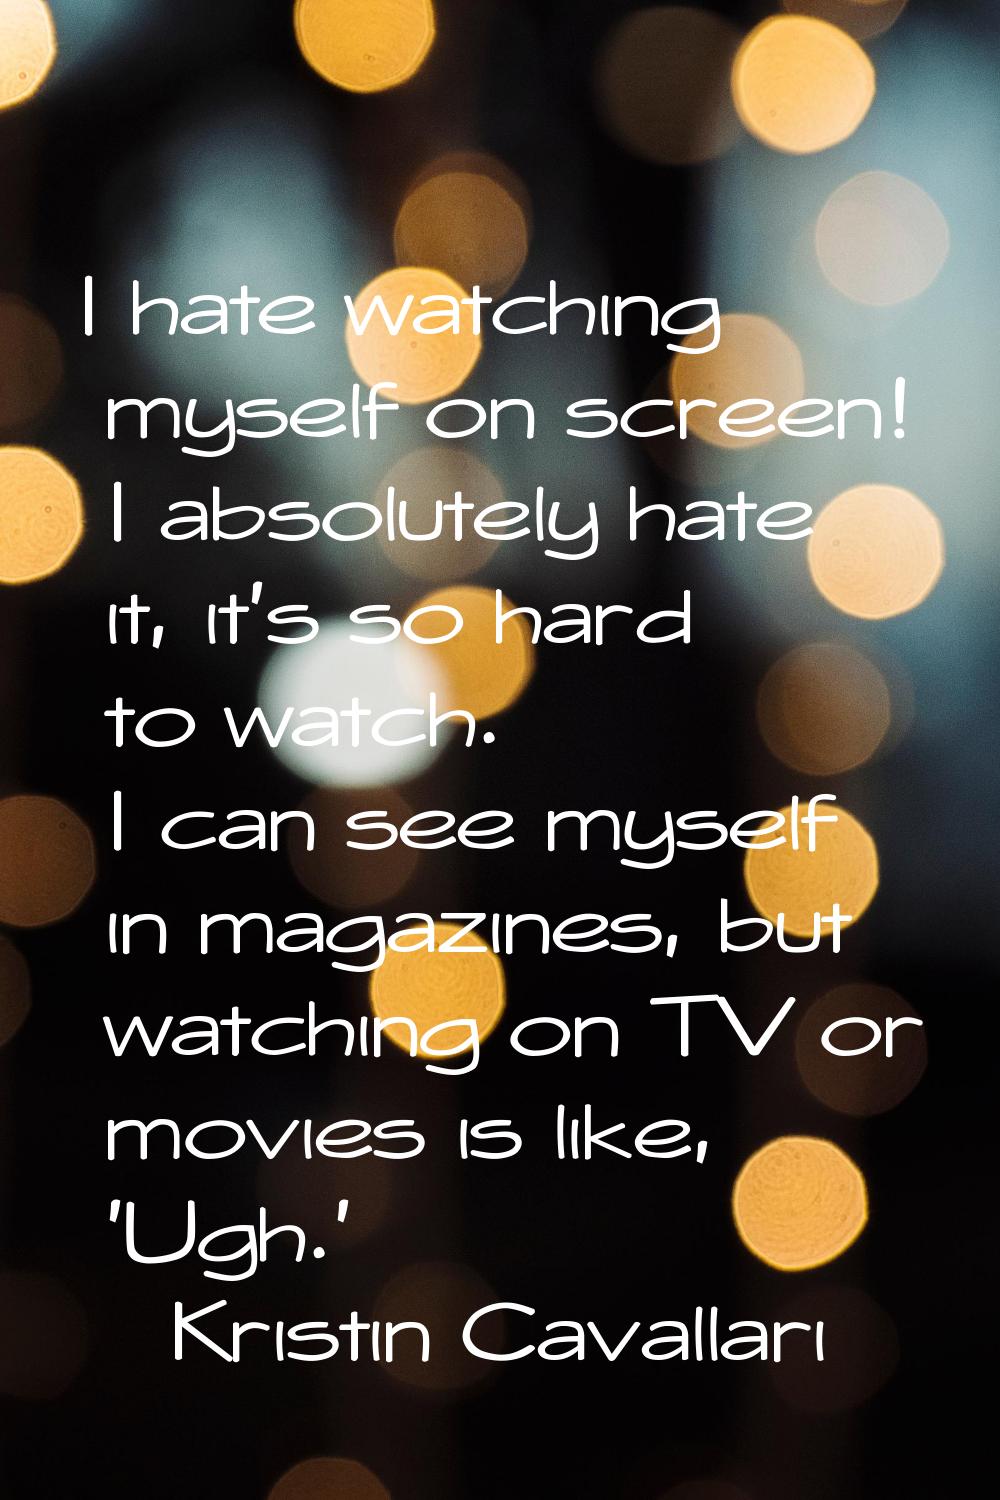 I hate watching myself on screen! I absolutely hate it, it's so hard to watch. I can see myself in 